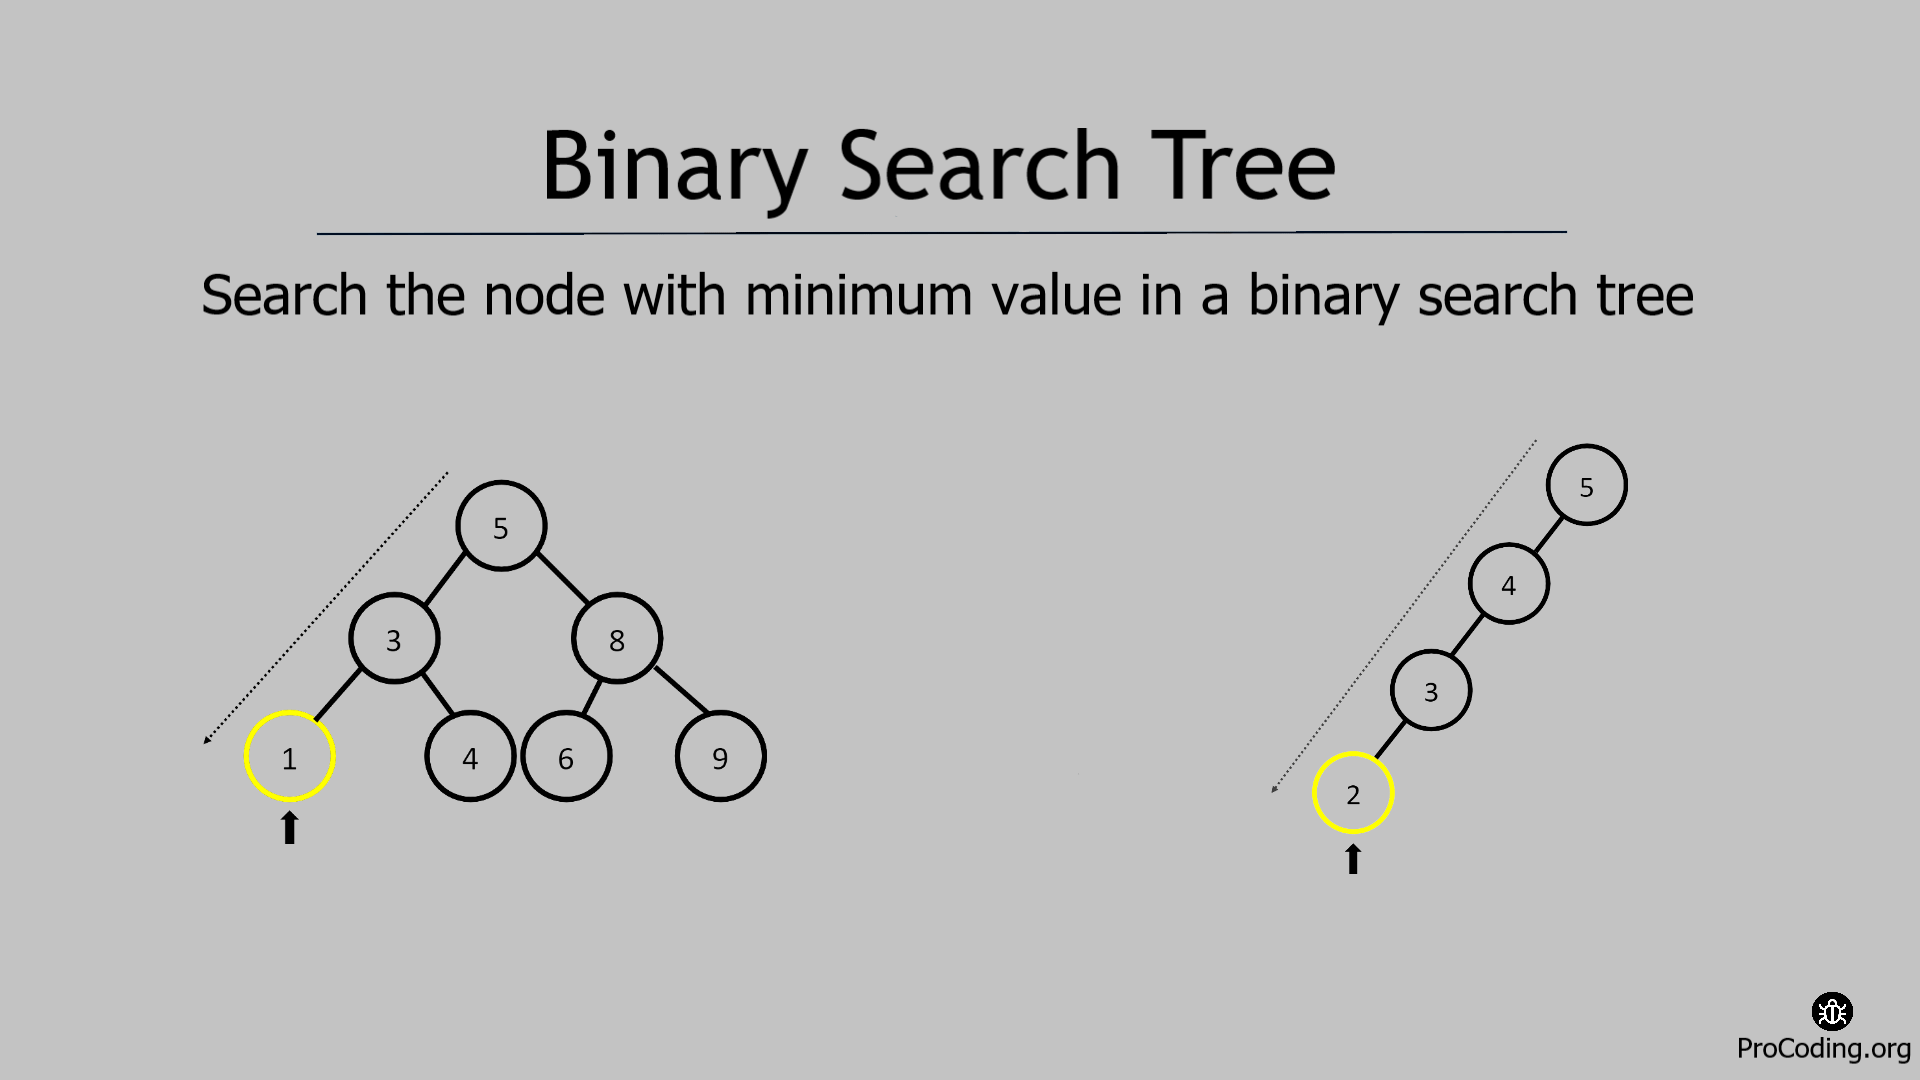 Search the node with minimum value in a binary search tree